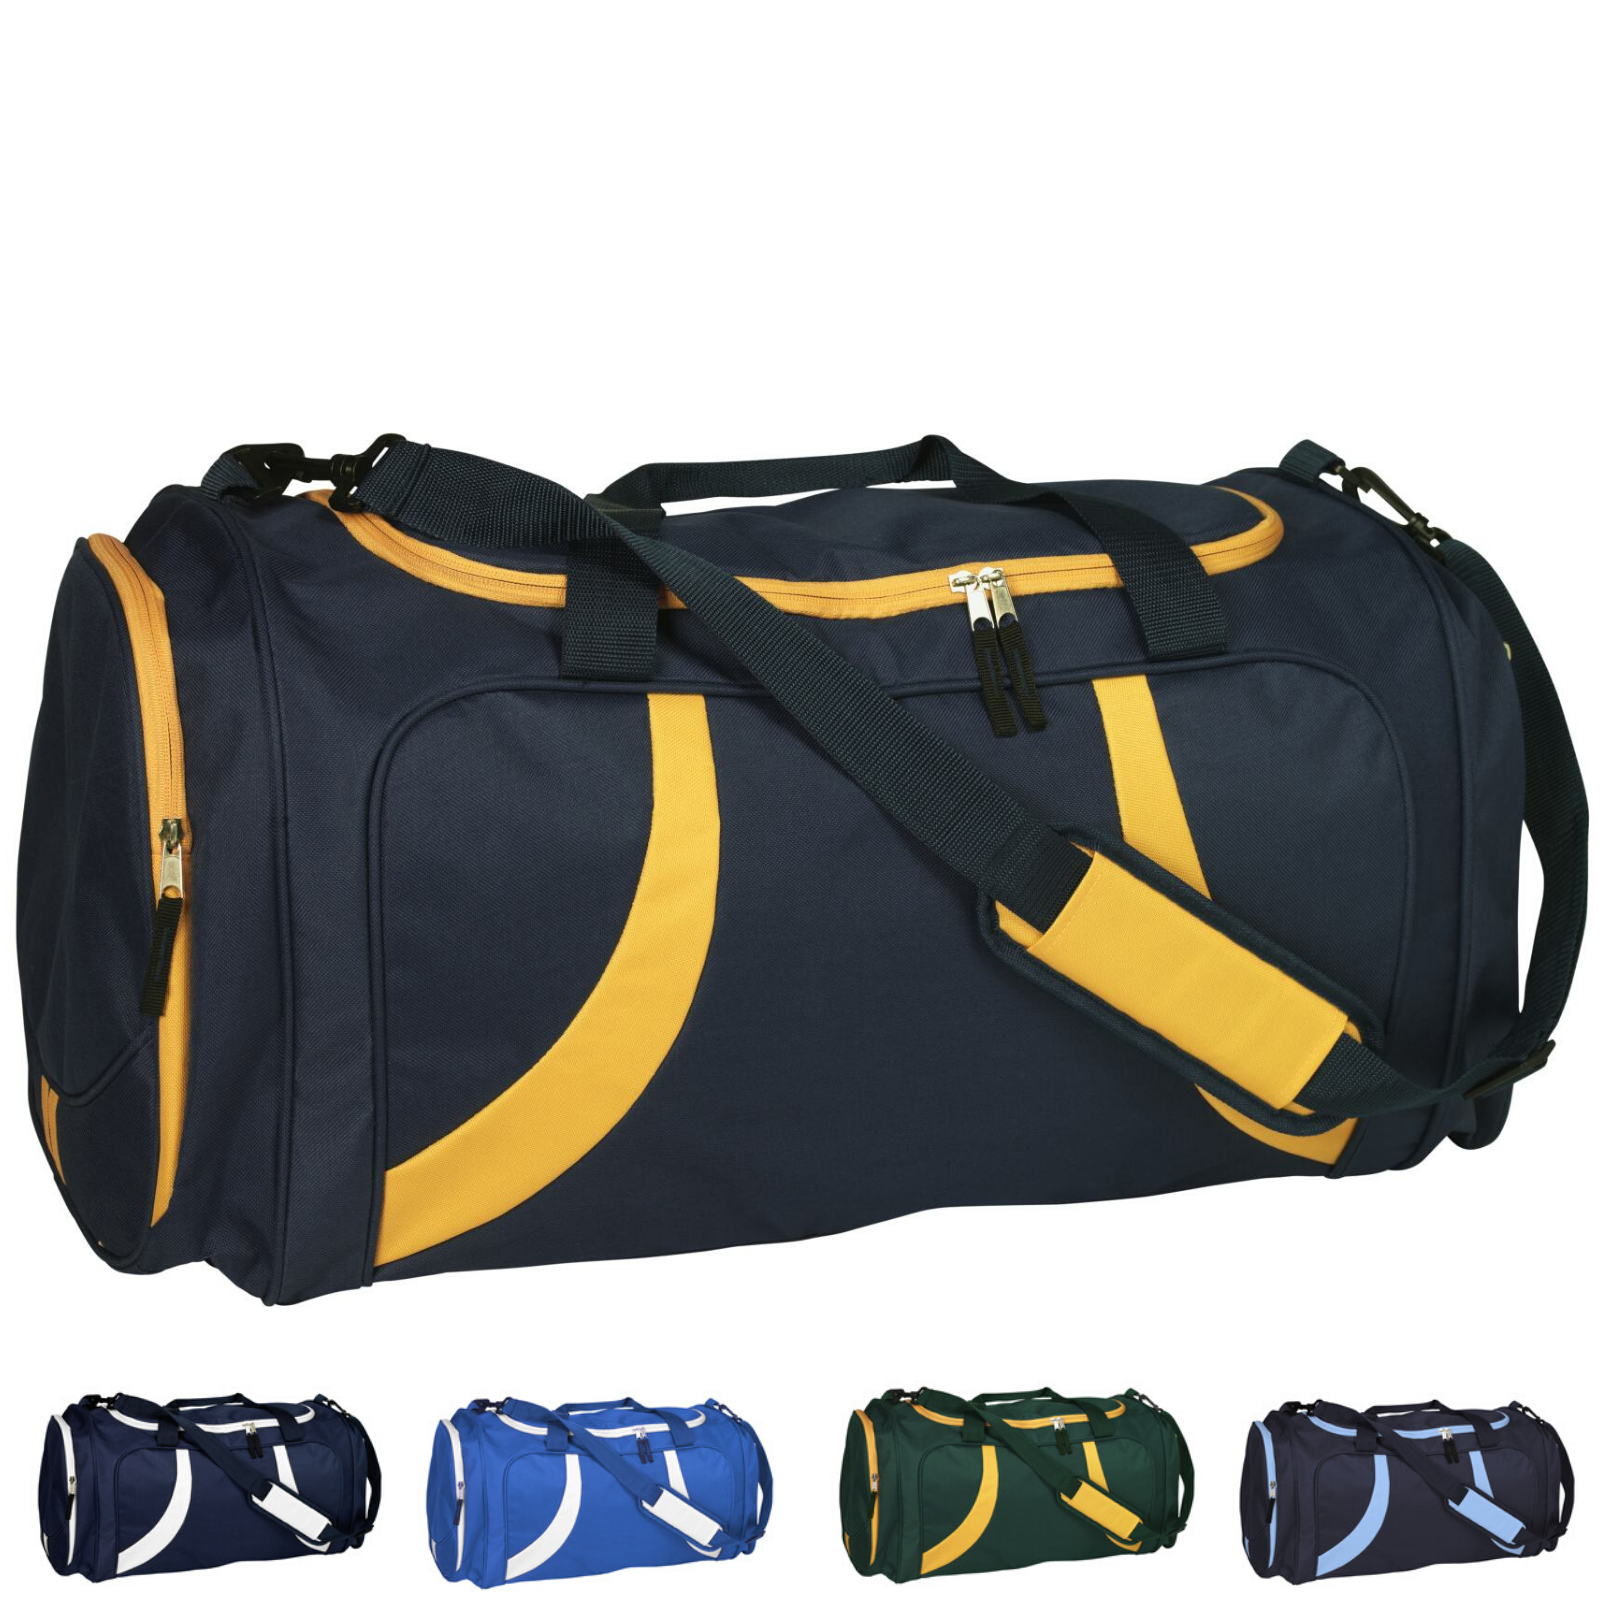 total sports travel bags